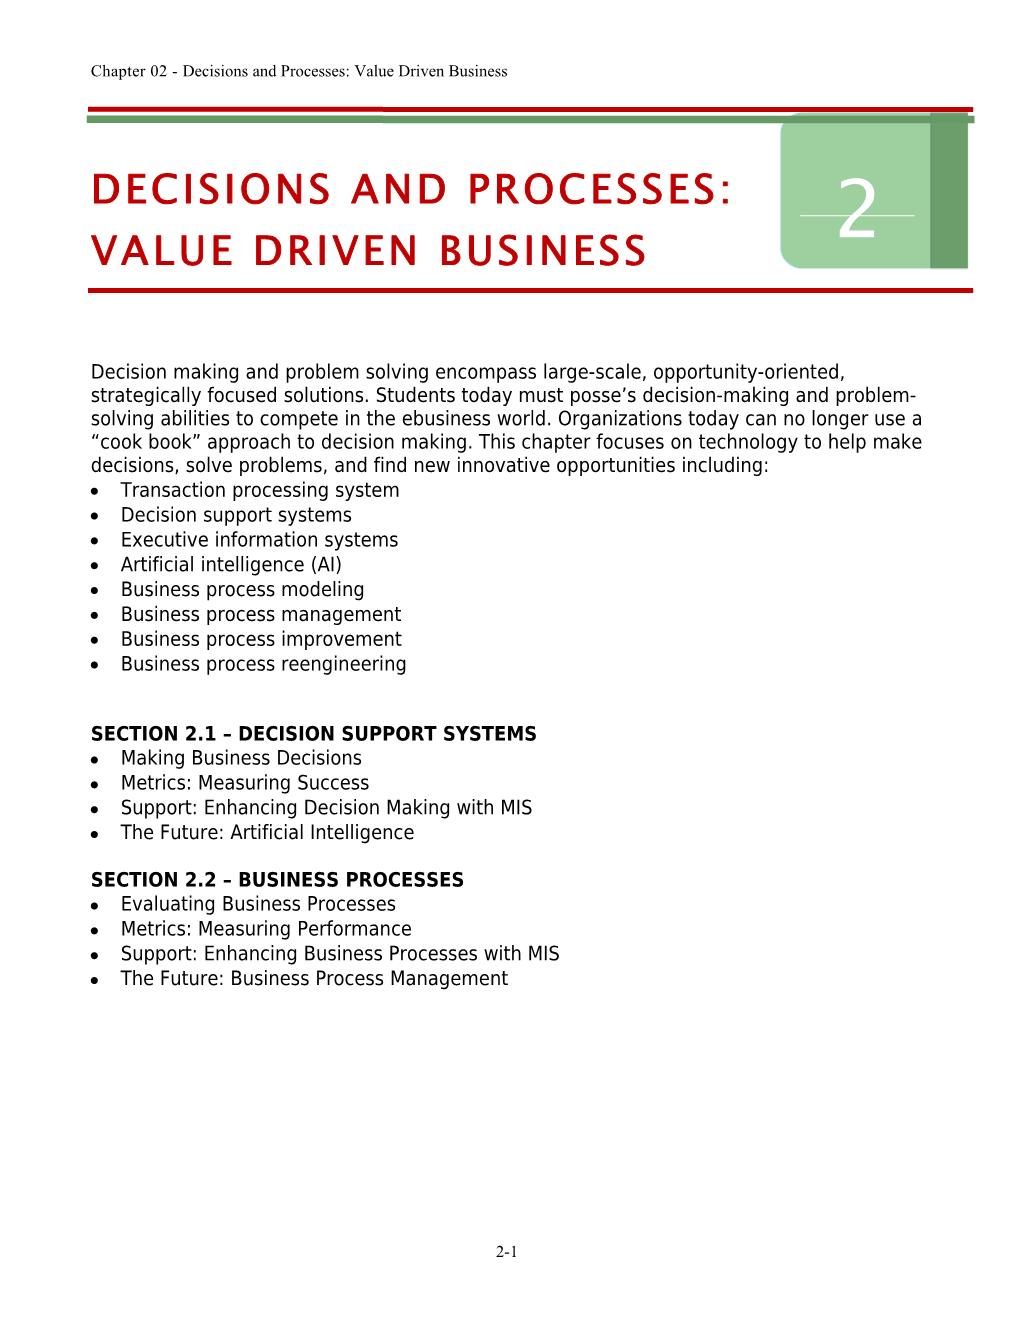 Decisions and Processes Value Driven Business